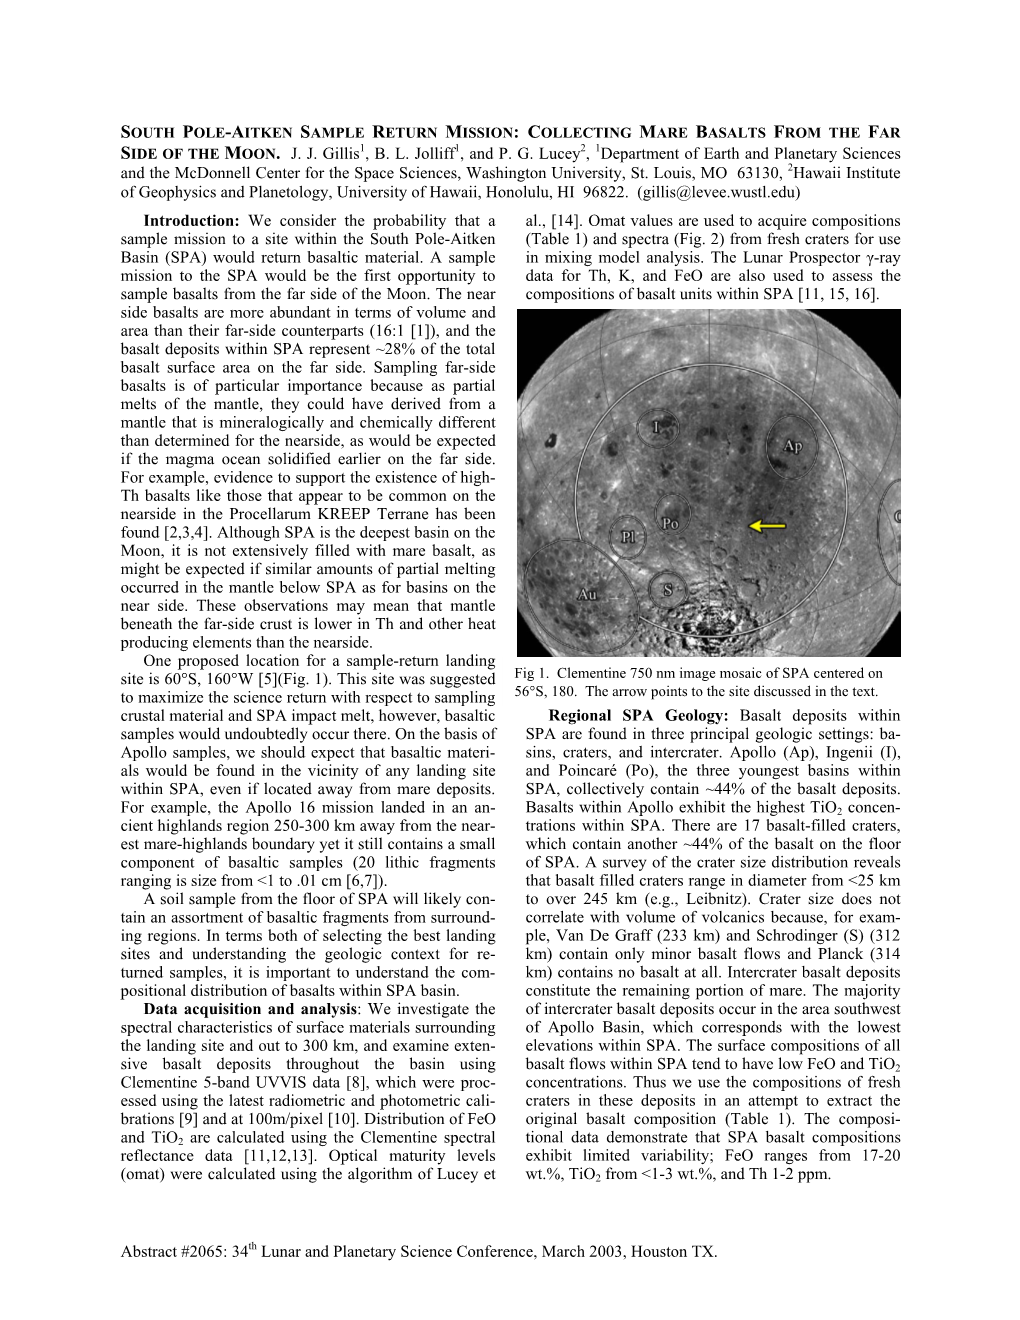 Abstract #2065: 34Th Lunar and Planetary Science Conference, March 2003, Houston TX